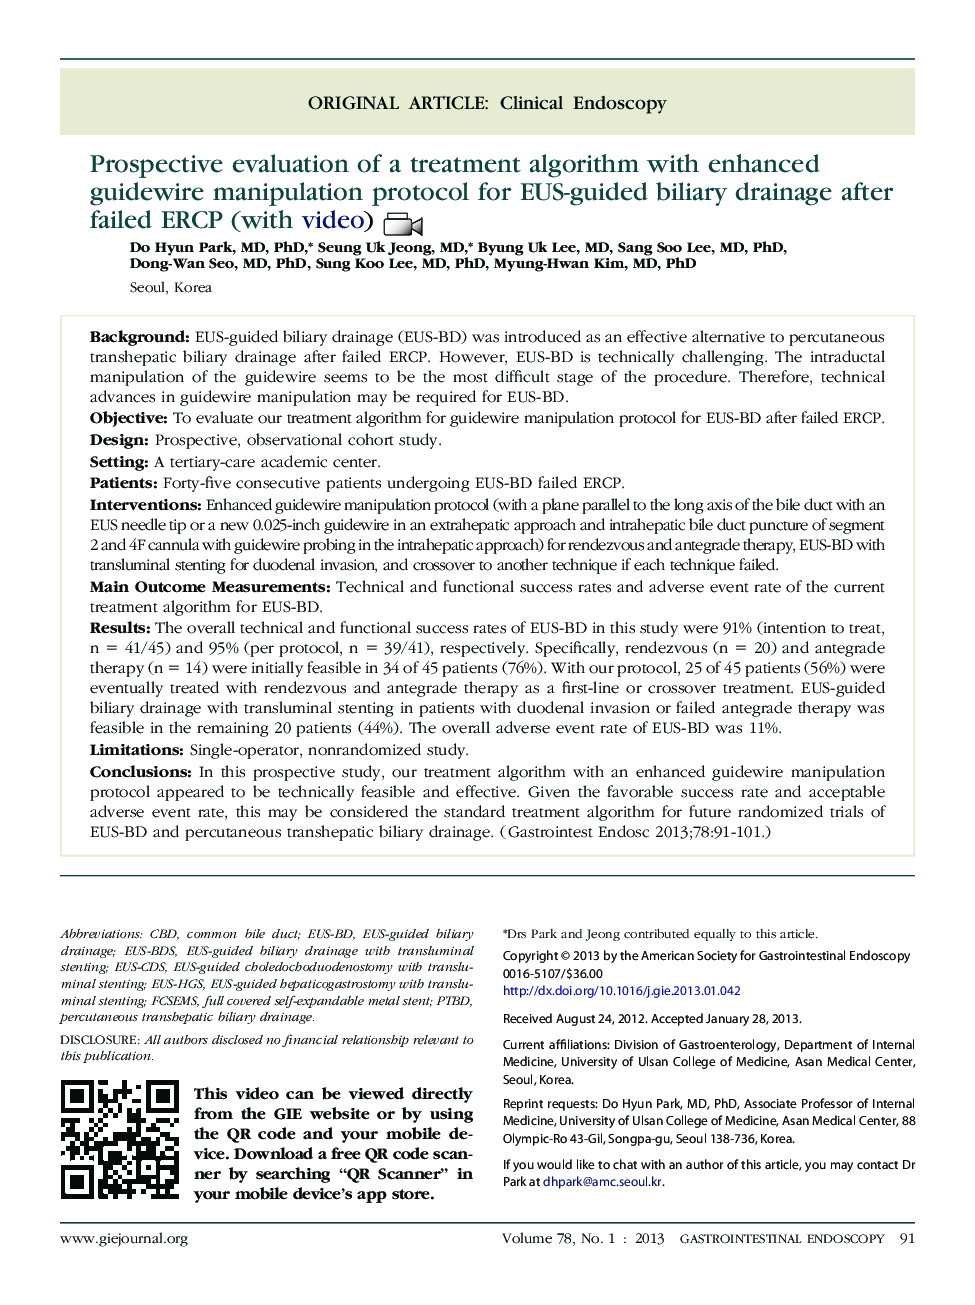 Prospective evaluation of a treatment algorithm with enhanced guidewire manipulation protocol for EUS-guided biliary drainage after failed ERCP (with video) 